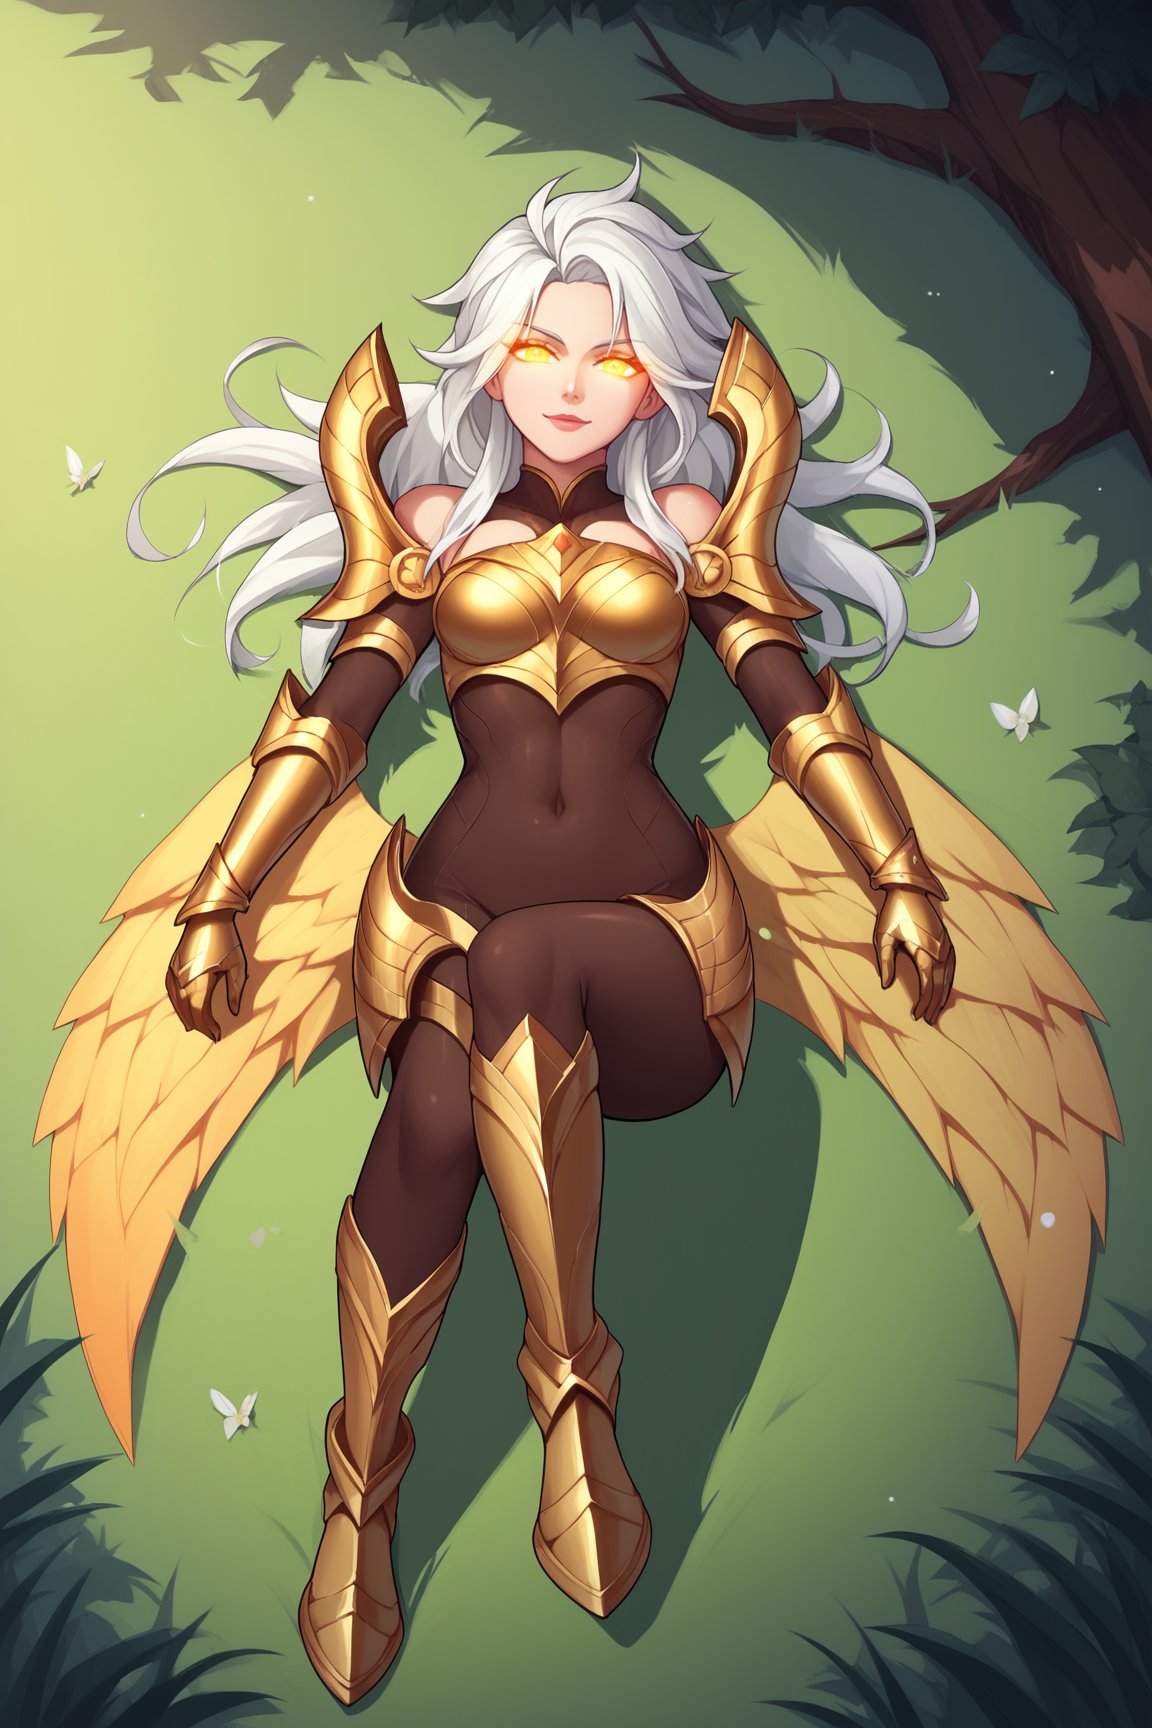 score_9, score_8_up, score_7_up, score_6_up, score_5_up, score_4_up, BREAK, KayleLoLXL, glowing eyes, yellow eyes, white hair, long hair, bangs, medium breasts, yellow wings, gold armor, gold shoulder armor, arm armor, gold gloves, gold breastplate, brown bodysuit, gold leg armor, gold armored boots, solo, full body, lying on grass, seductive smile, looking at viewer, forest, tree <lora:KayleLoLXL:0.9>